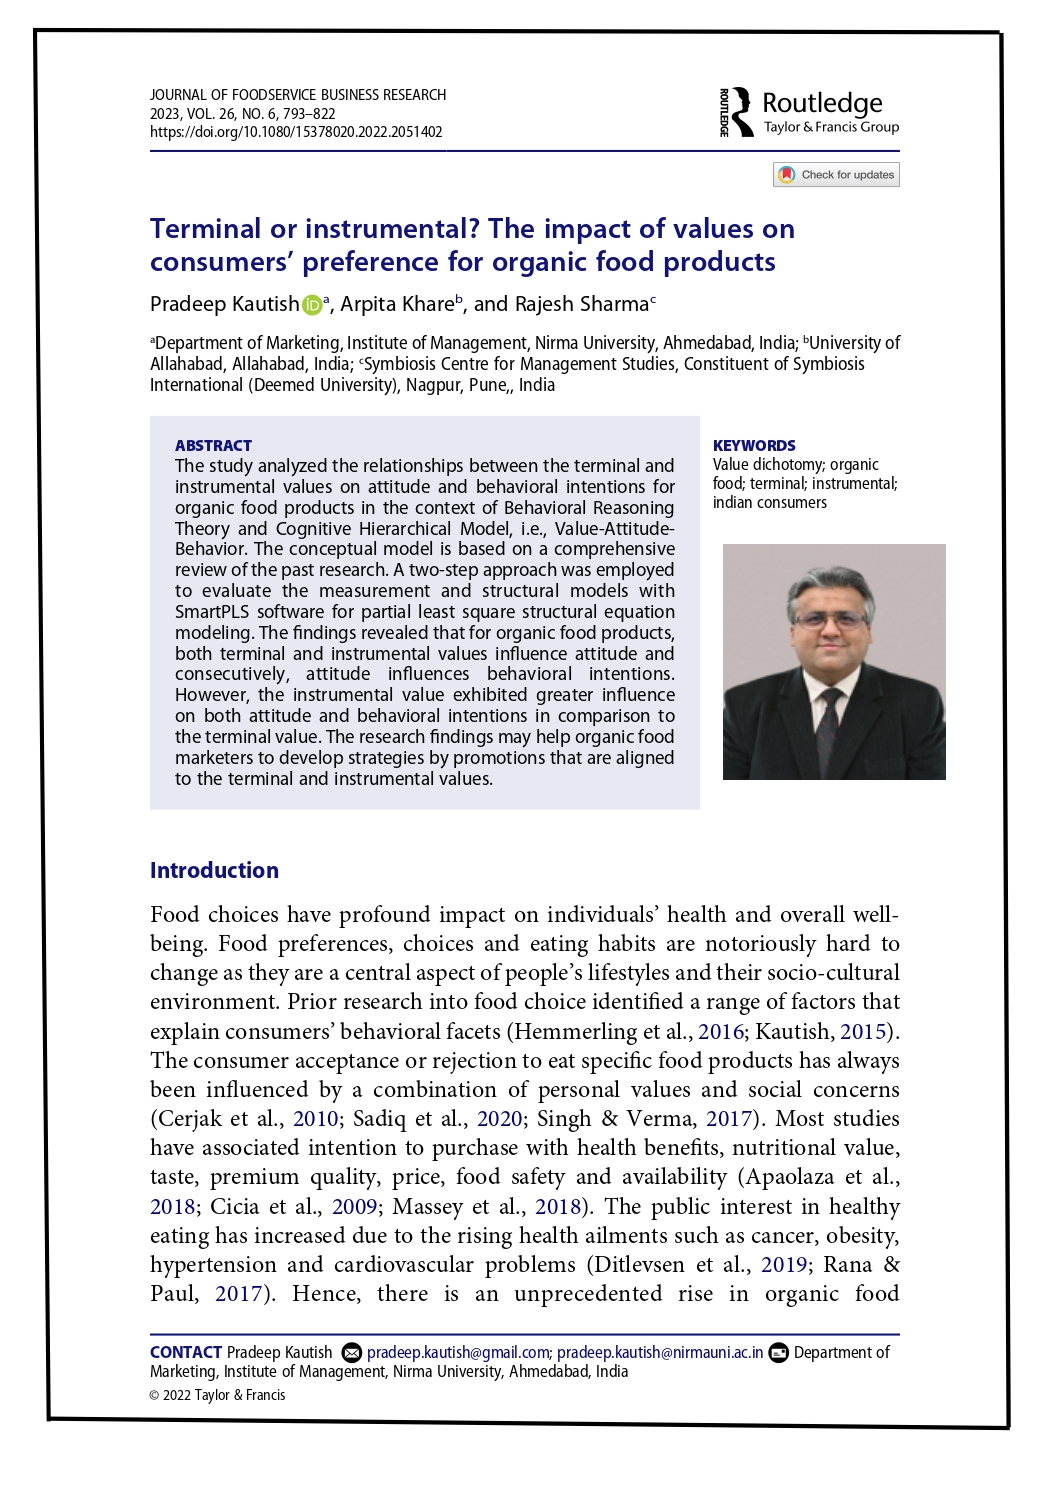 Terminal or instrumental? The impact of values on consumers’ preference for organic food products